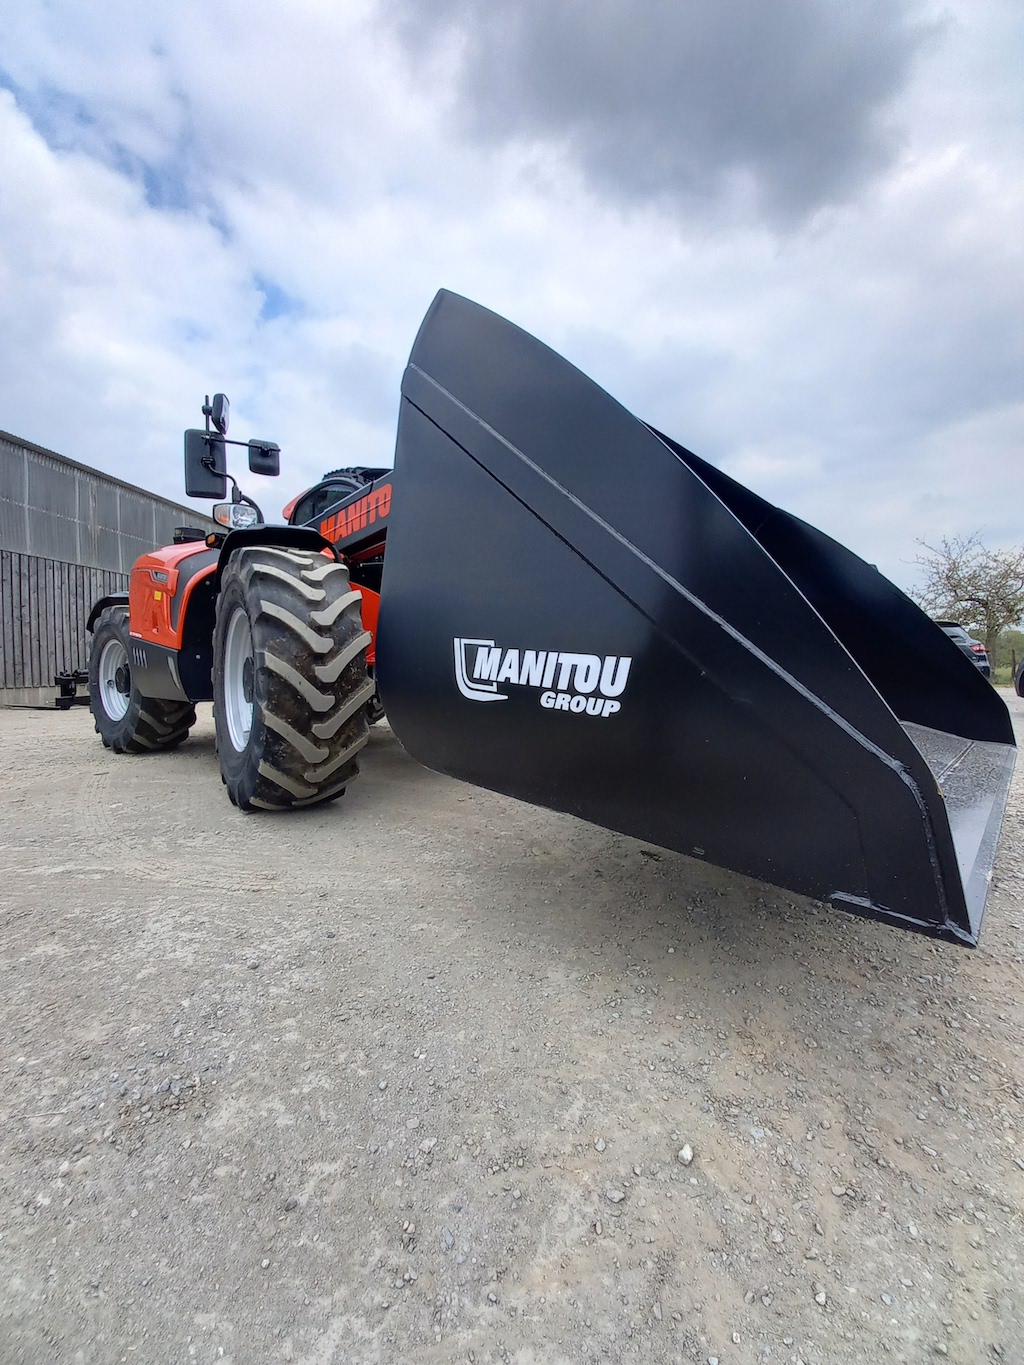 Launch of the “Manitou Group Attachments” brand